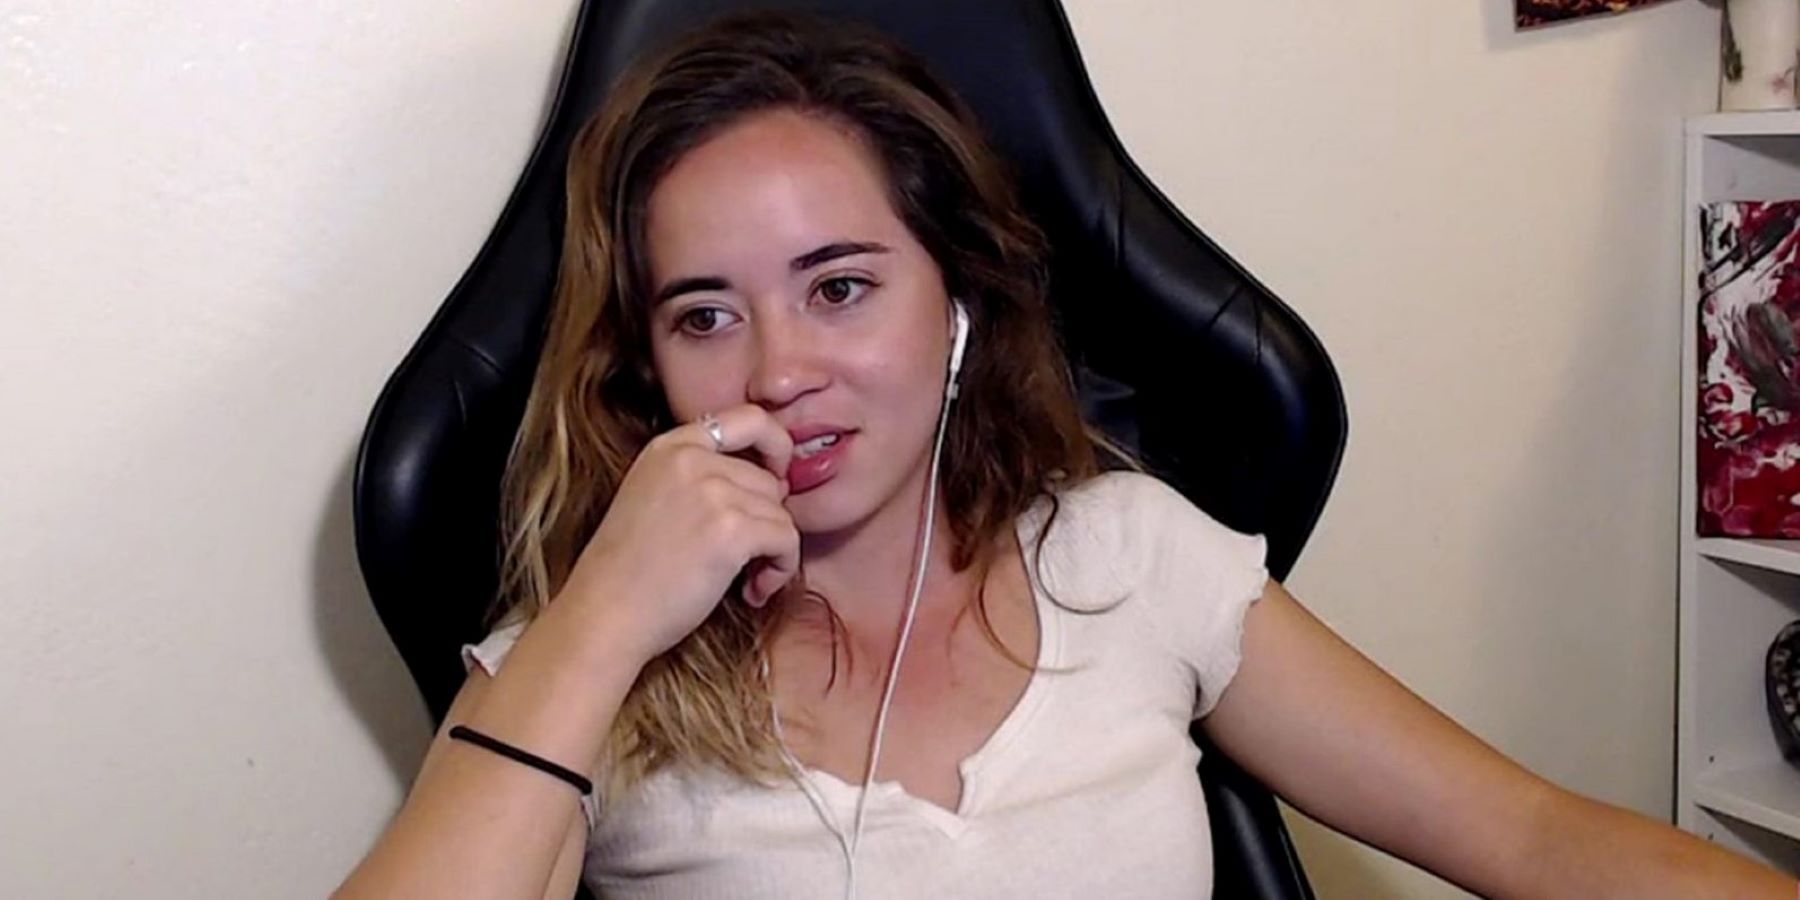 Twitch streamer Maya wearing earbuds and looking concerned during a stream